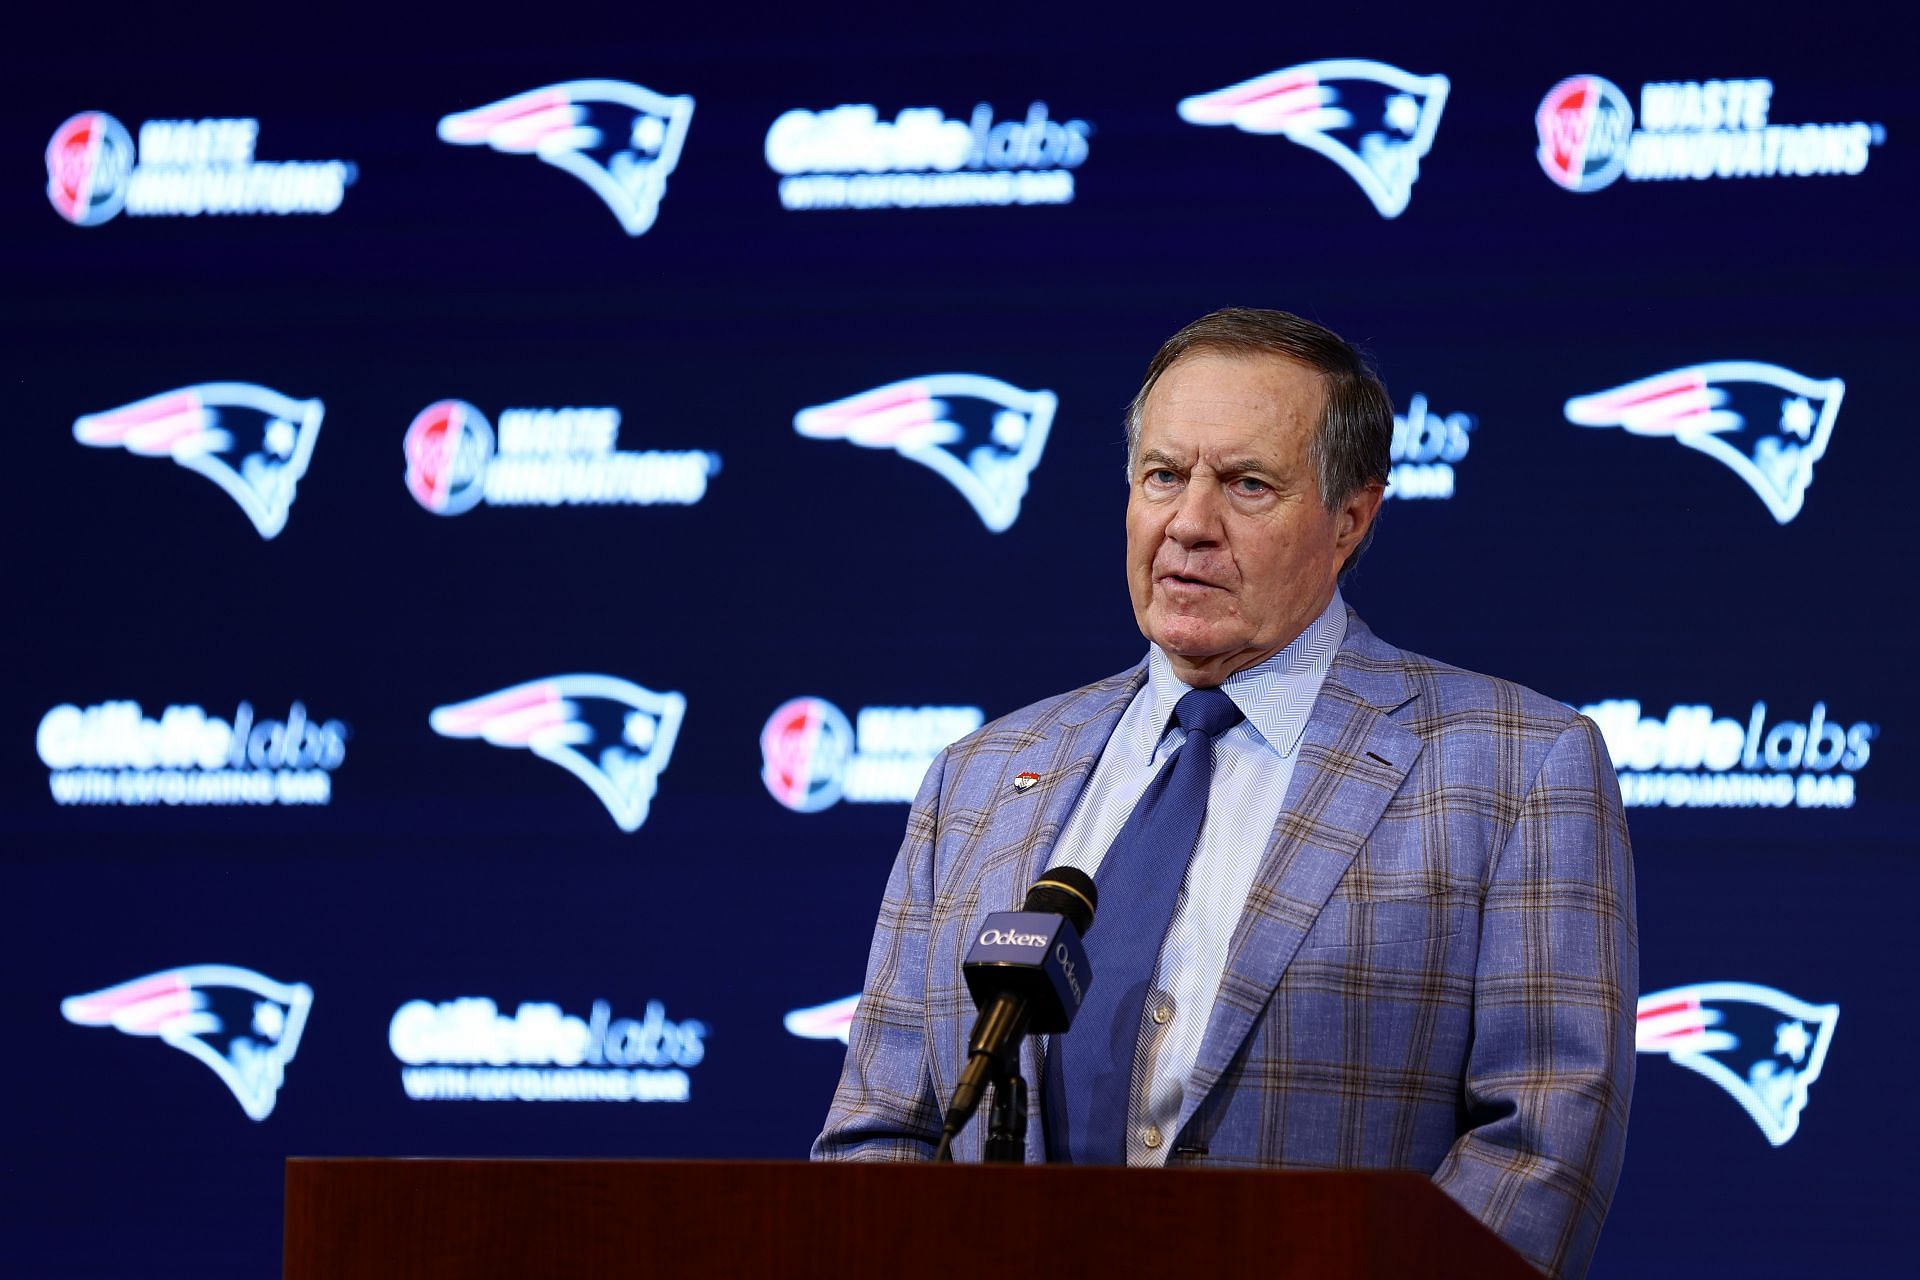 Bill Belichick at New England Patriots Press Conference